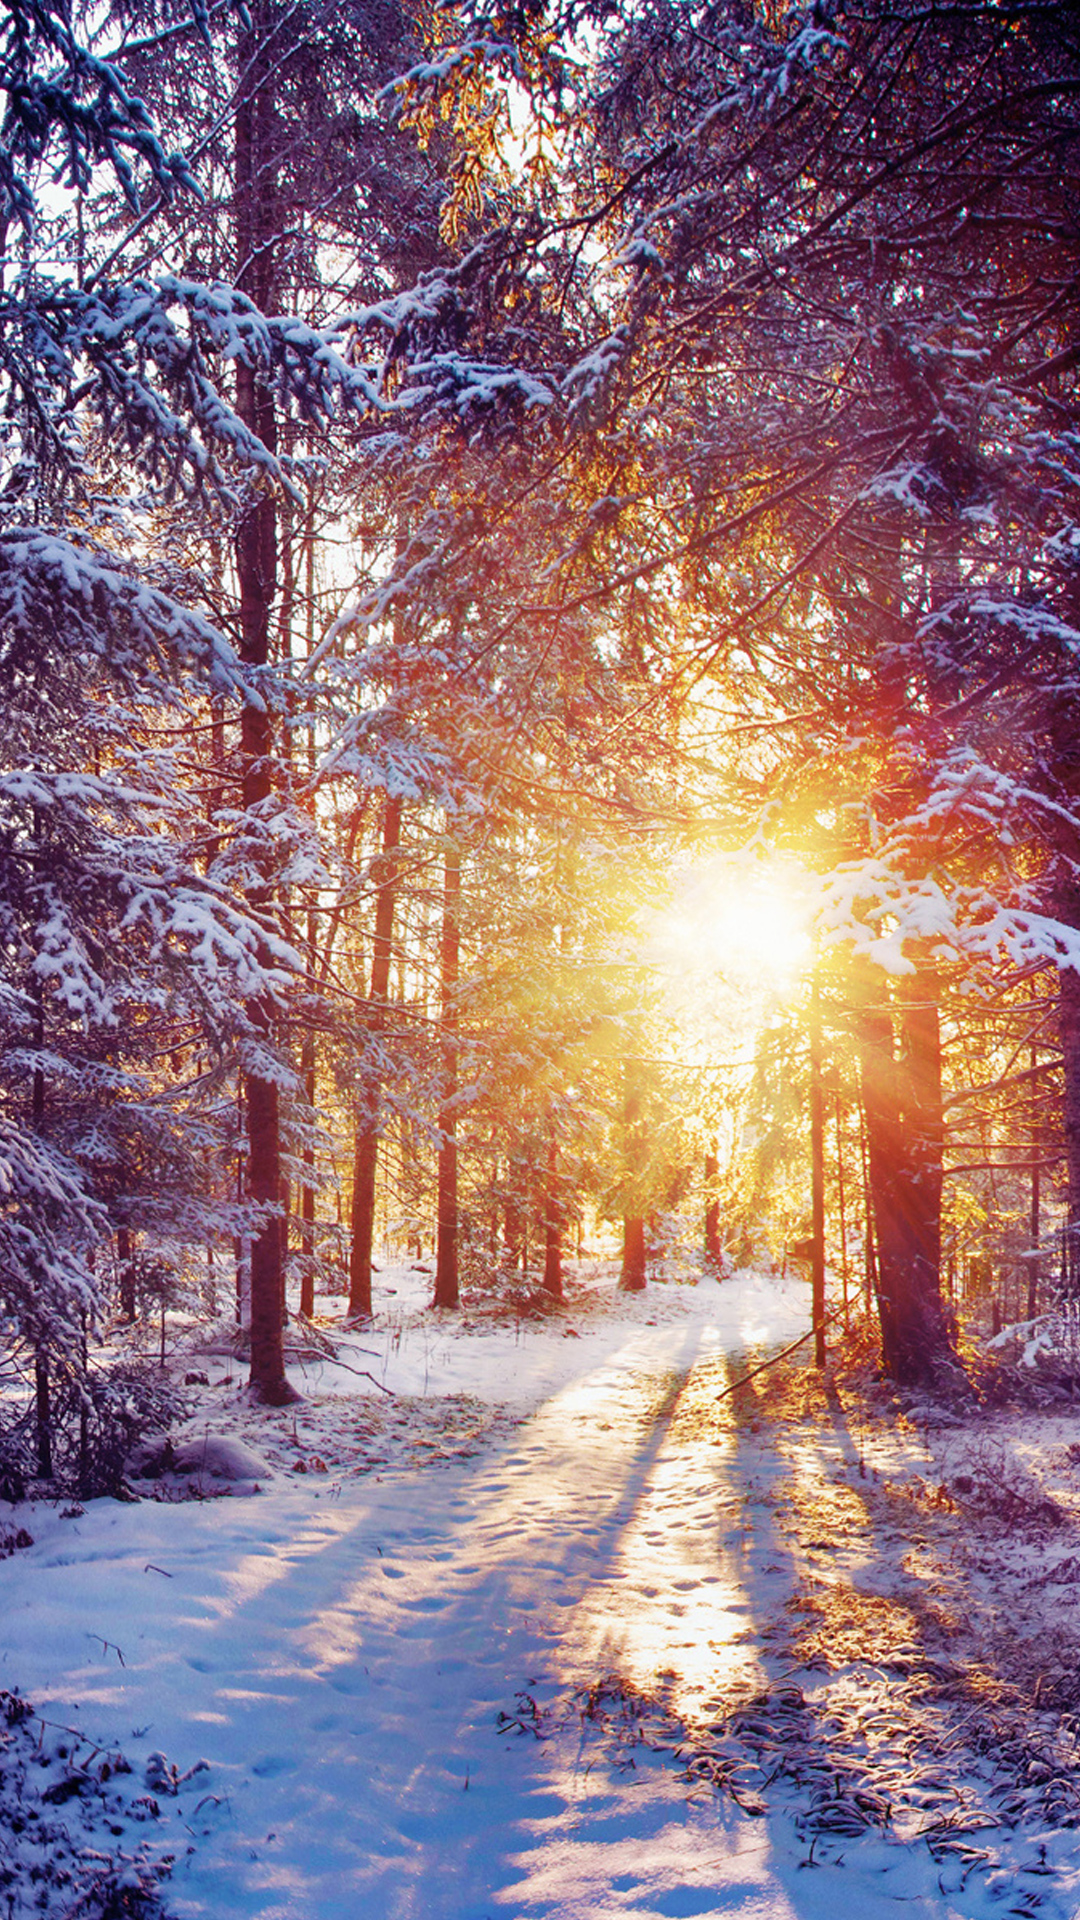 Winter-Sunset-Shining-Through-Forest-Trees-iPhone-6-Plus-HD-Wallpaper.